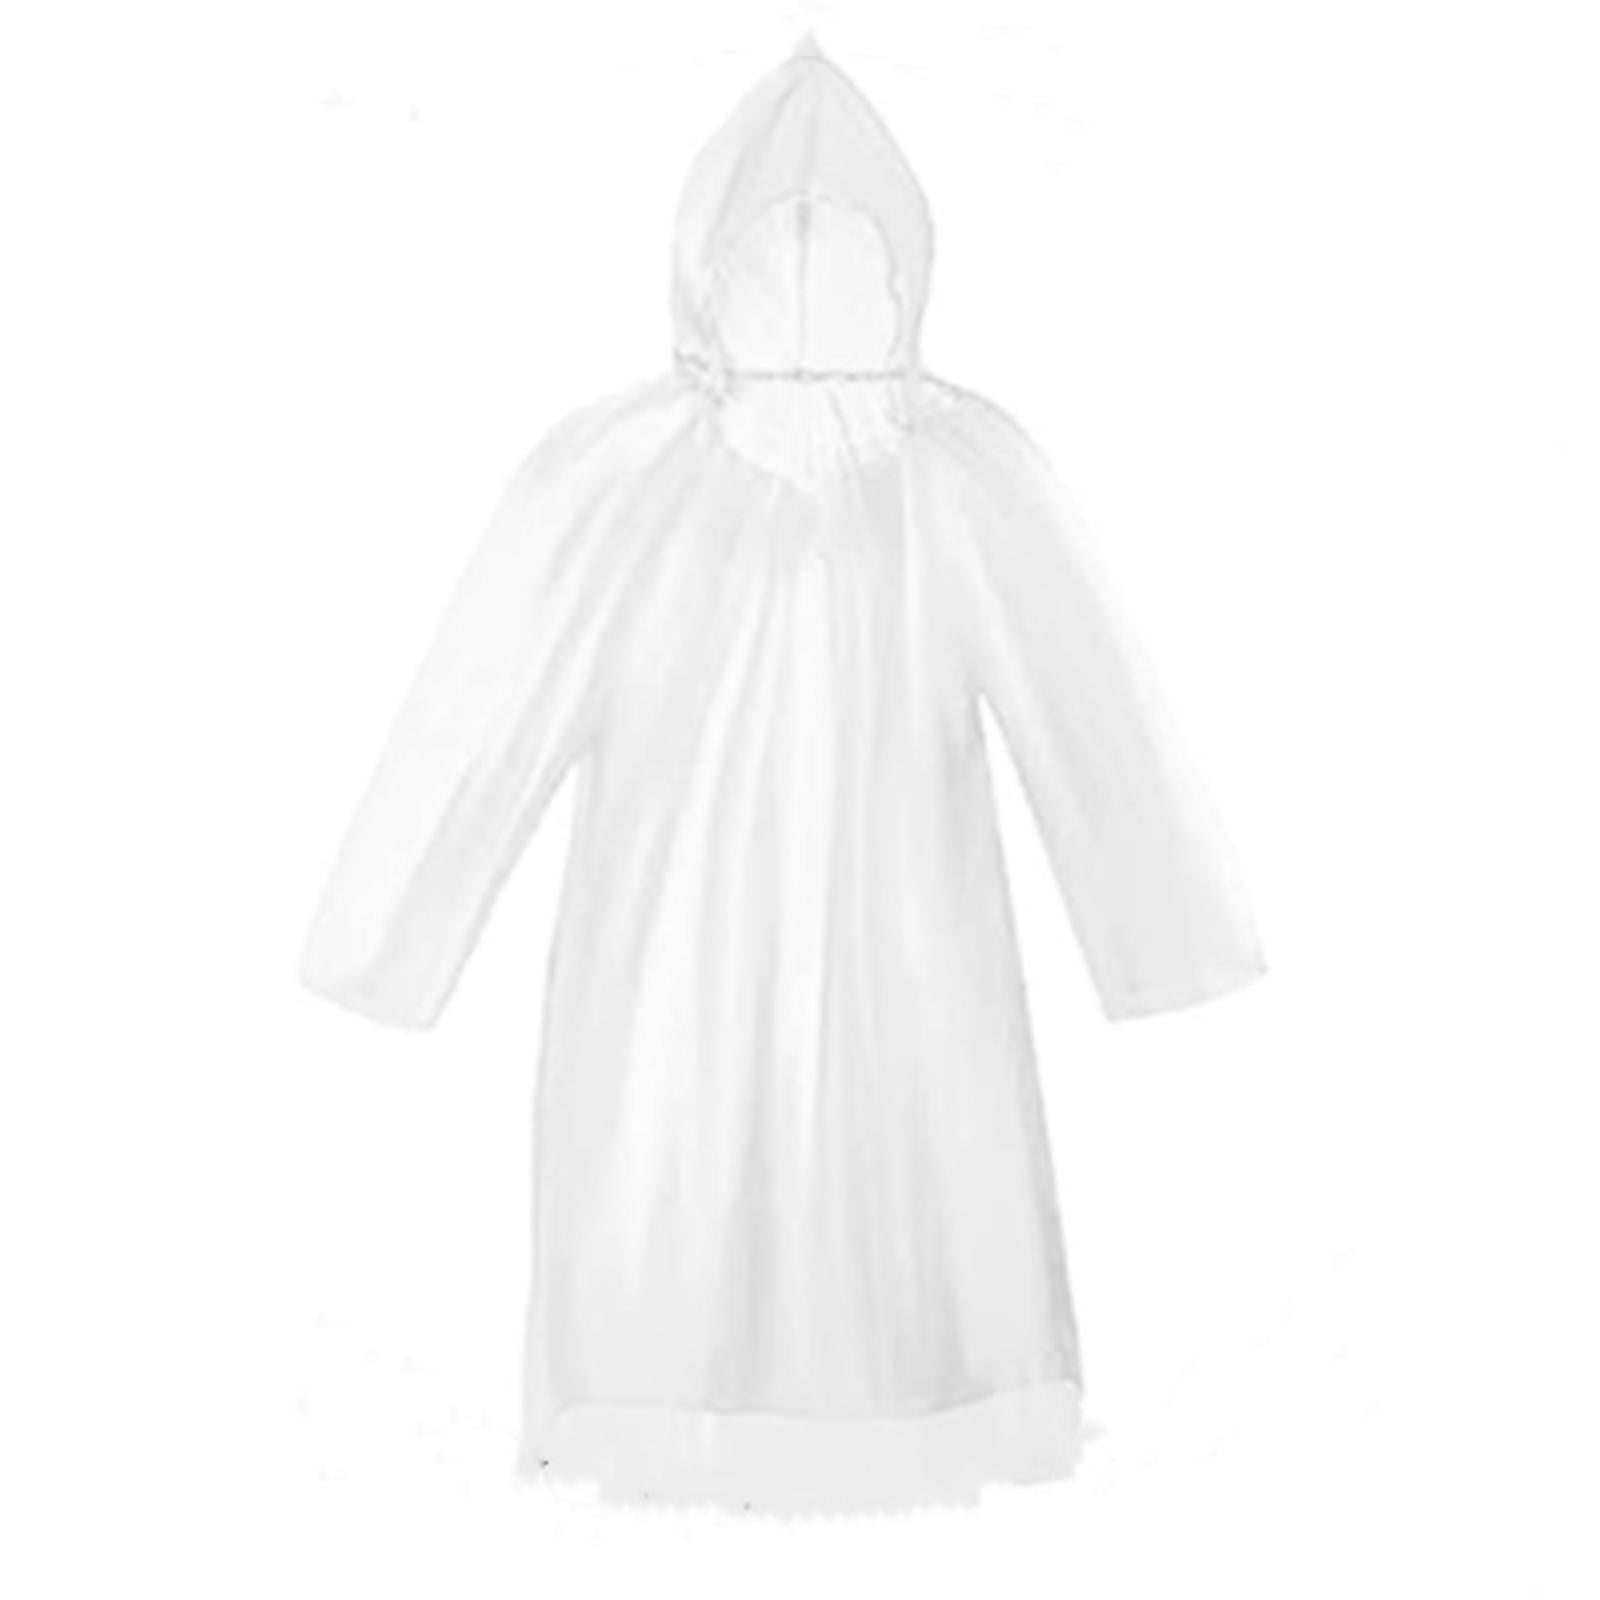 Clear Rain Ponchos Emergency Ponchos for Hiking Sporting Event Climbing ...